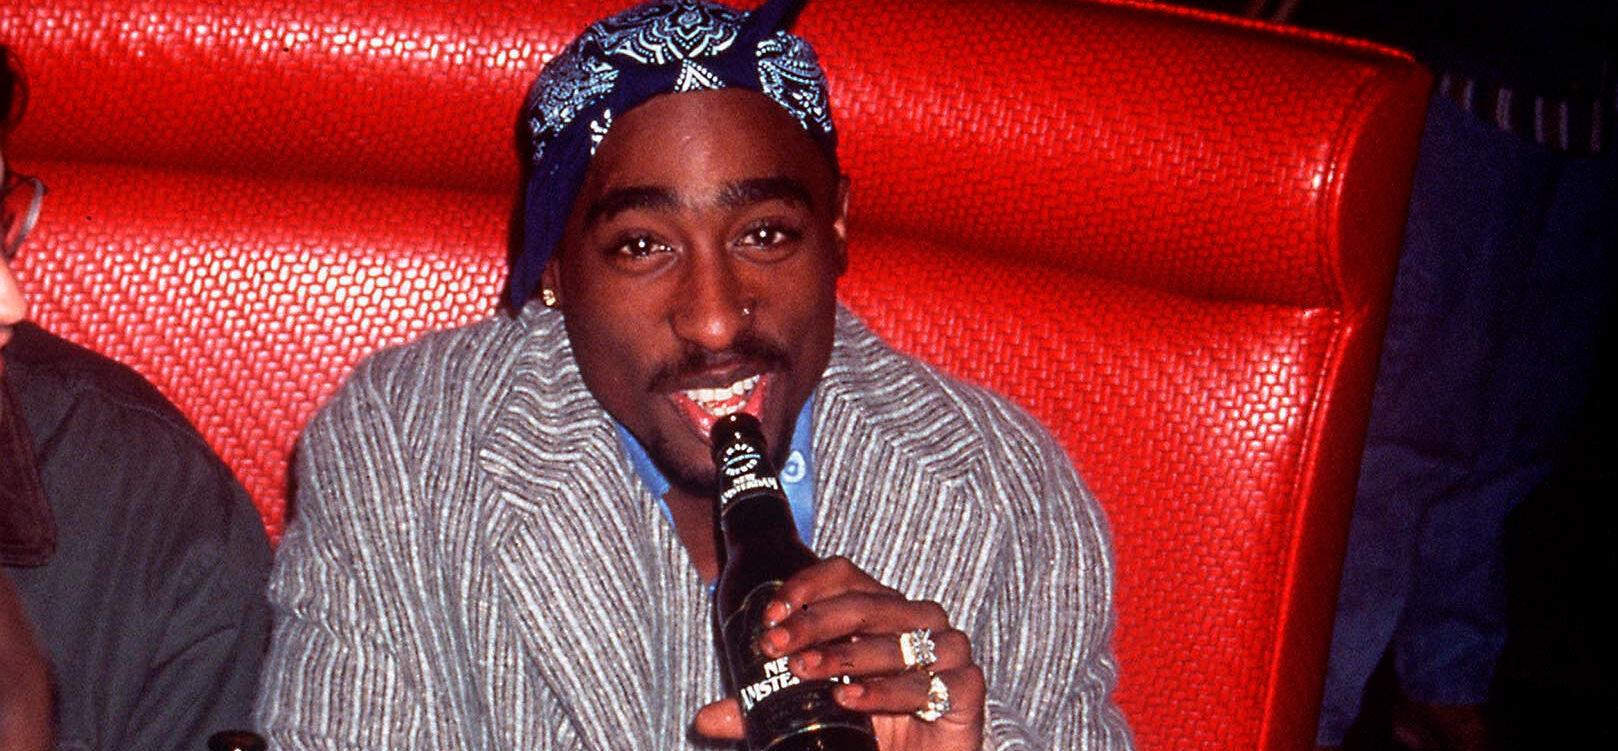 The Man Charged With Tupac Shakur's Murder Mugshot Revealed